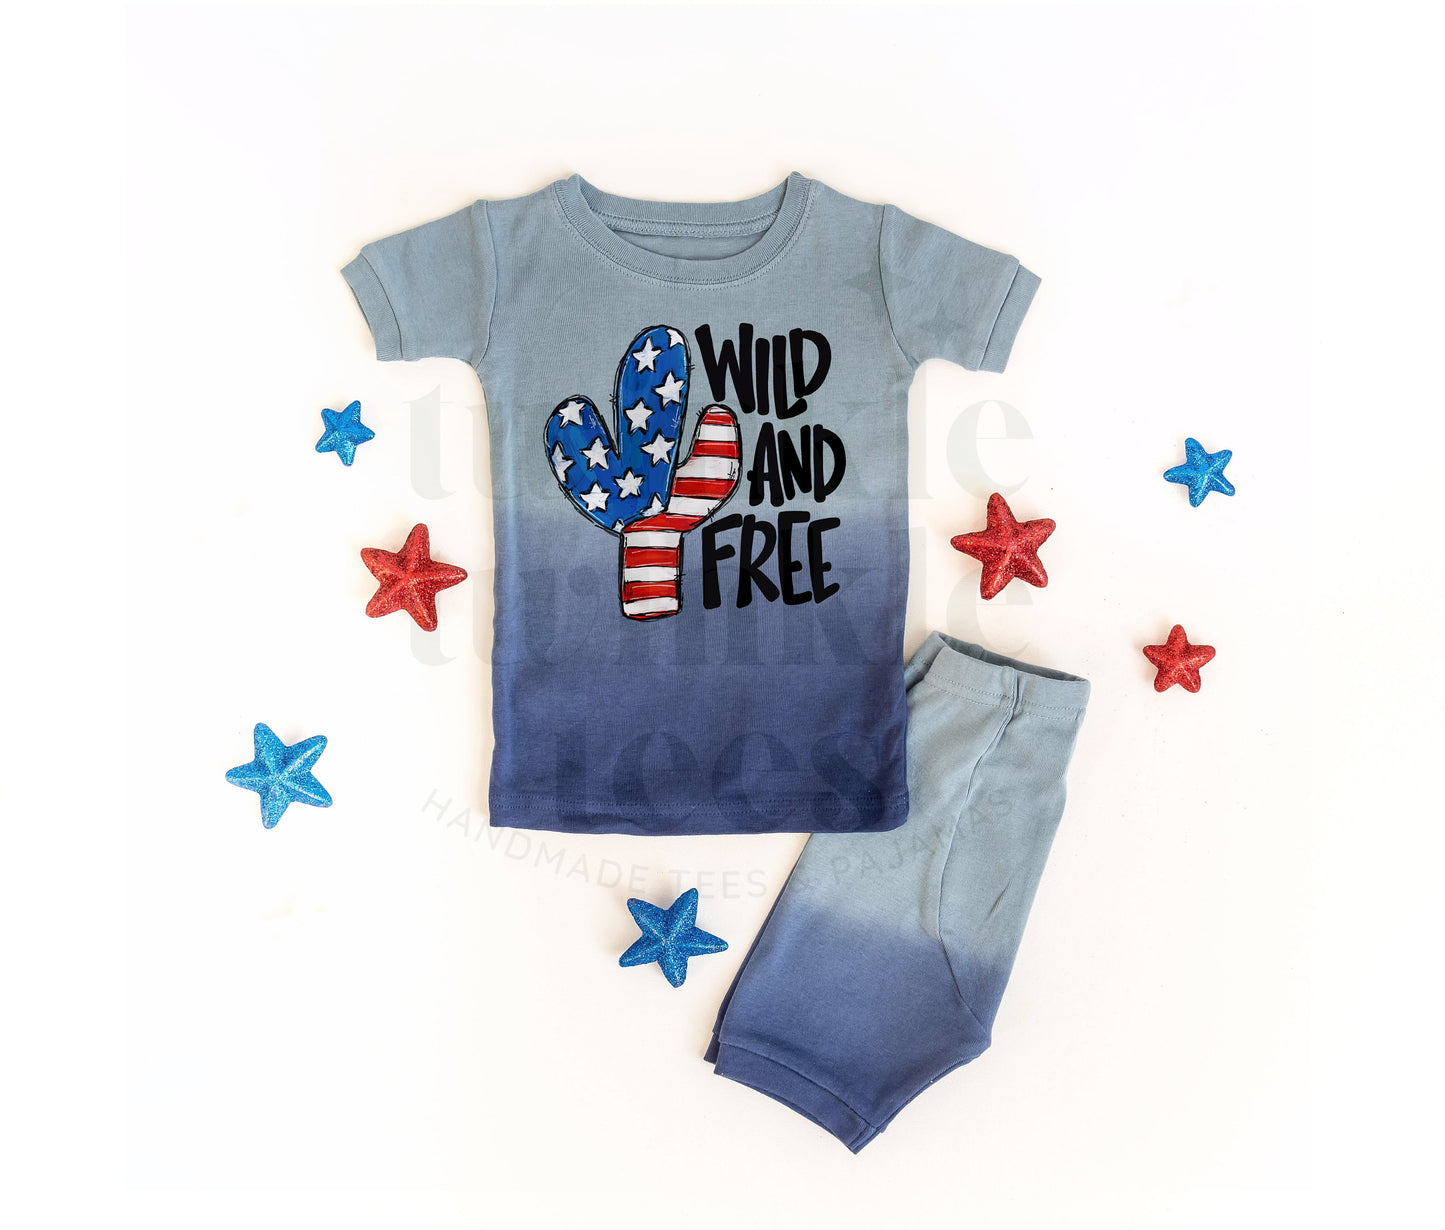 Wild and Free Pink or Blue Ombre Shorts Set for Kids - Kids 4th of July Set - 4th of July Toddler Shirt and Shorts